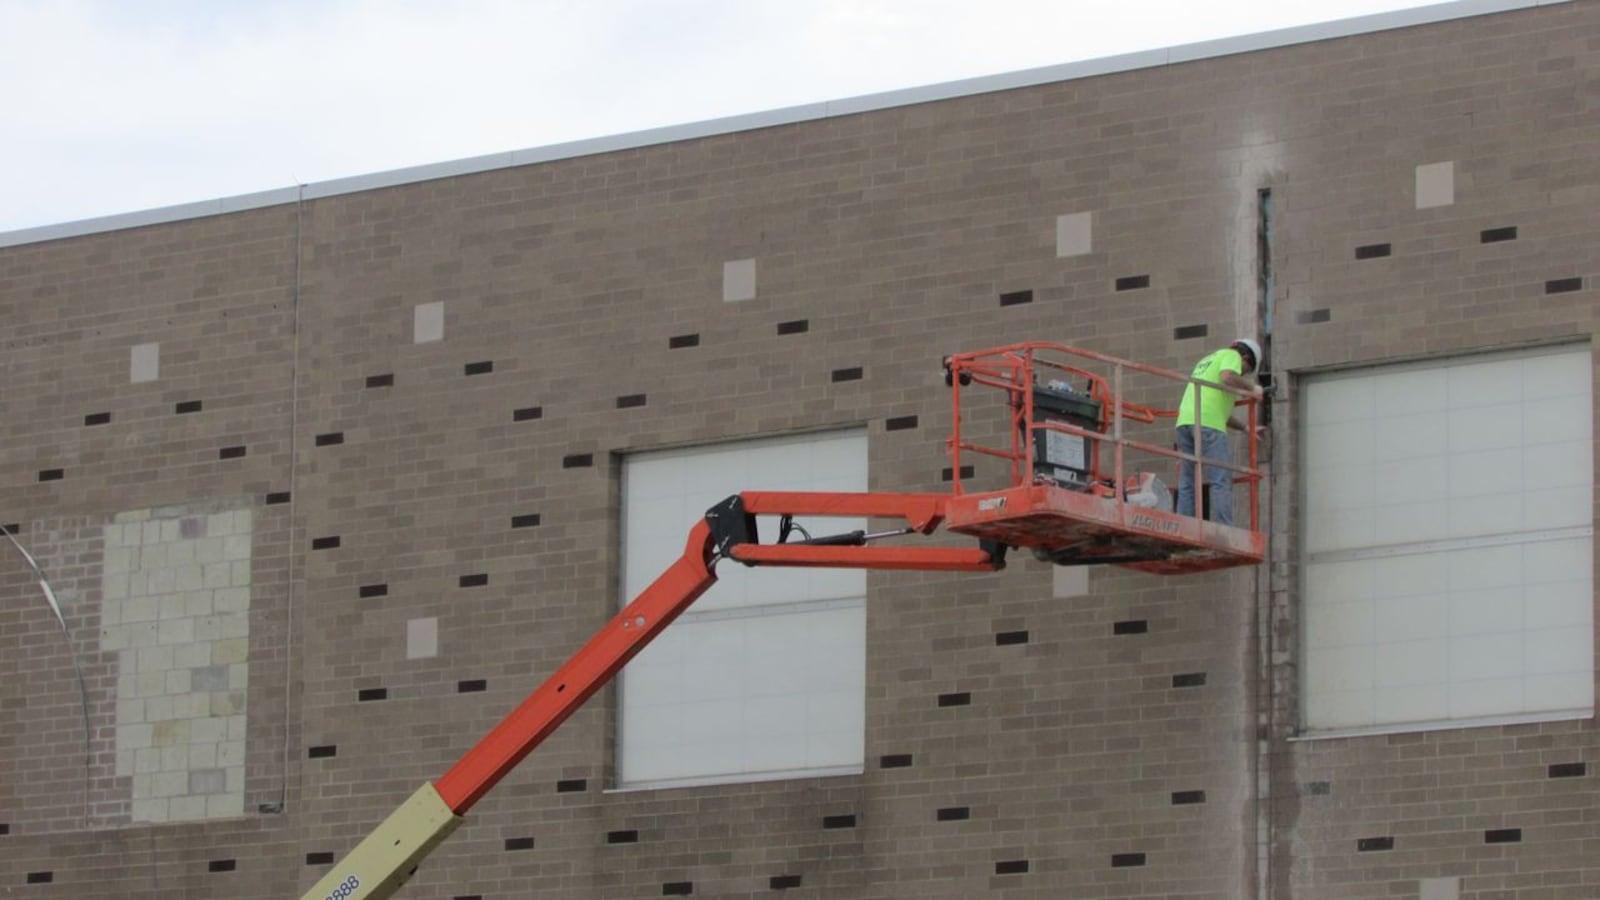 Perry Township and Beech Grove Schools have school repairs as part of their plans if voters approve new money Tuesday.